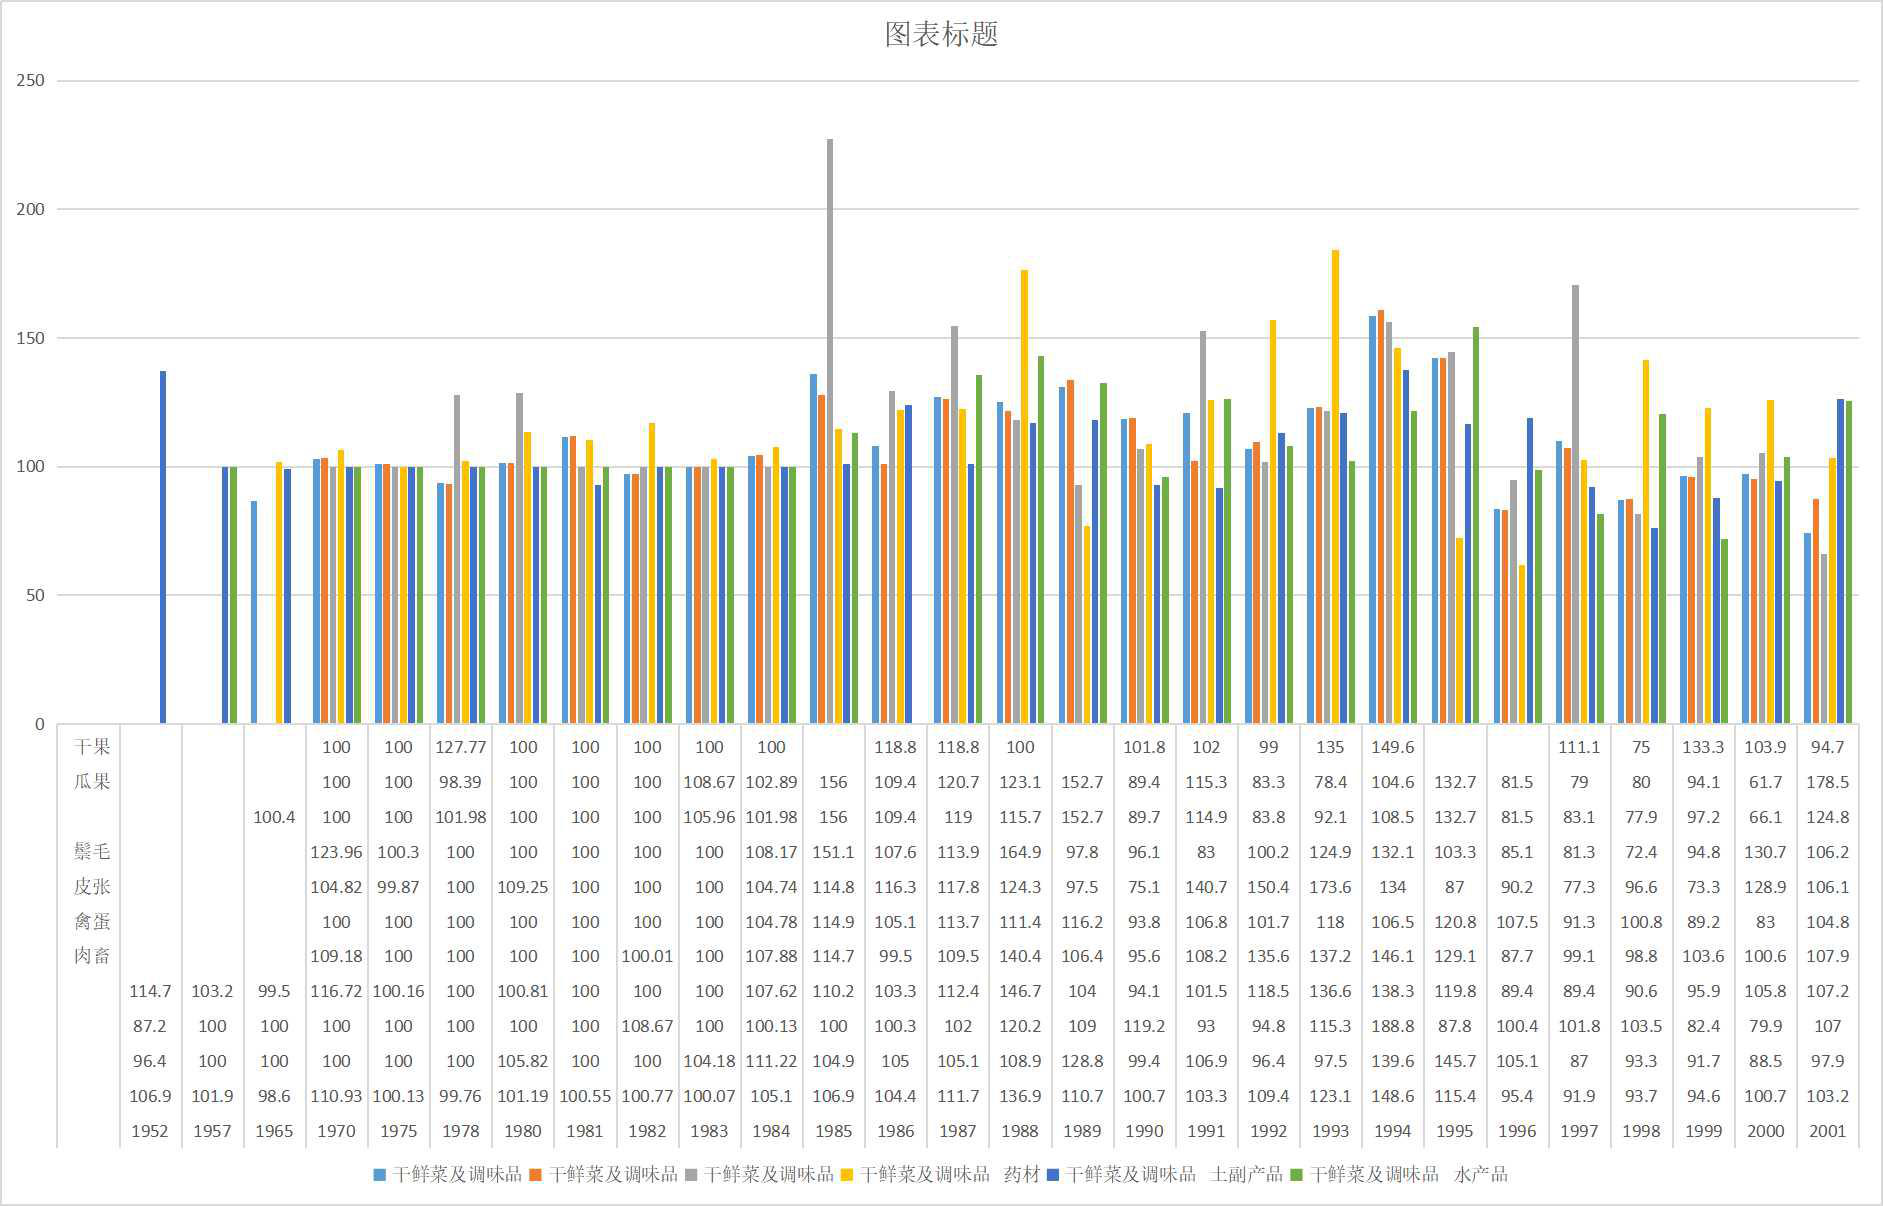 Qinghai agricultural products purchase price index (1952-2001)